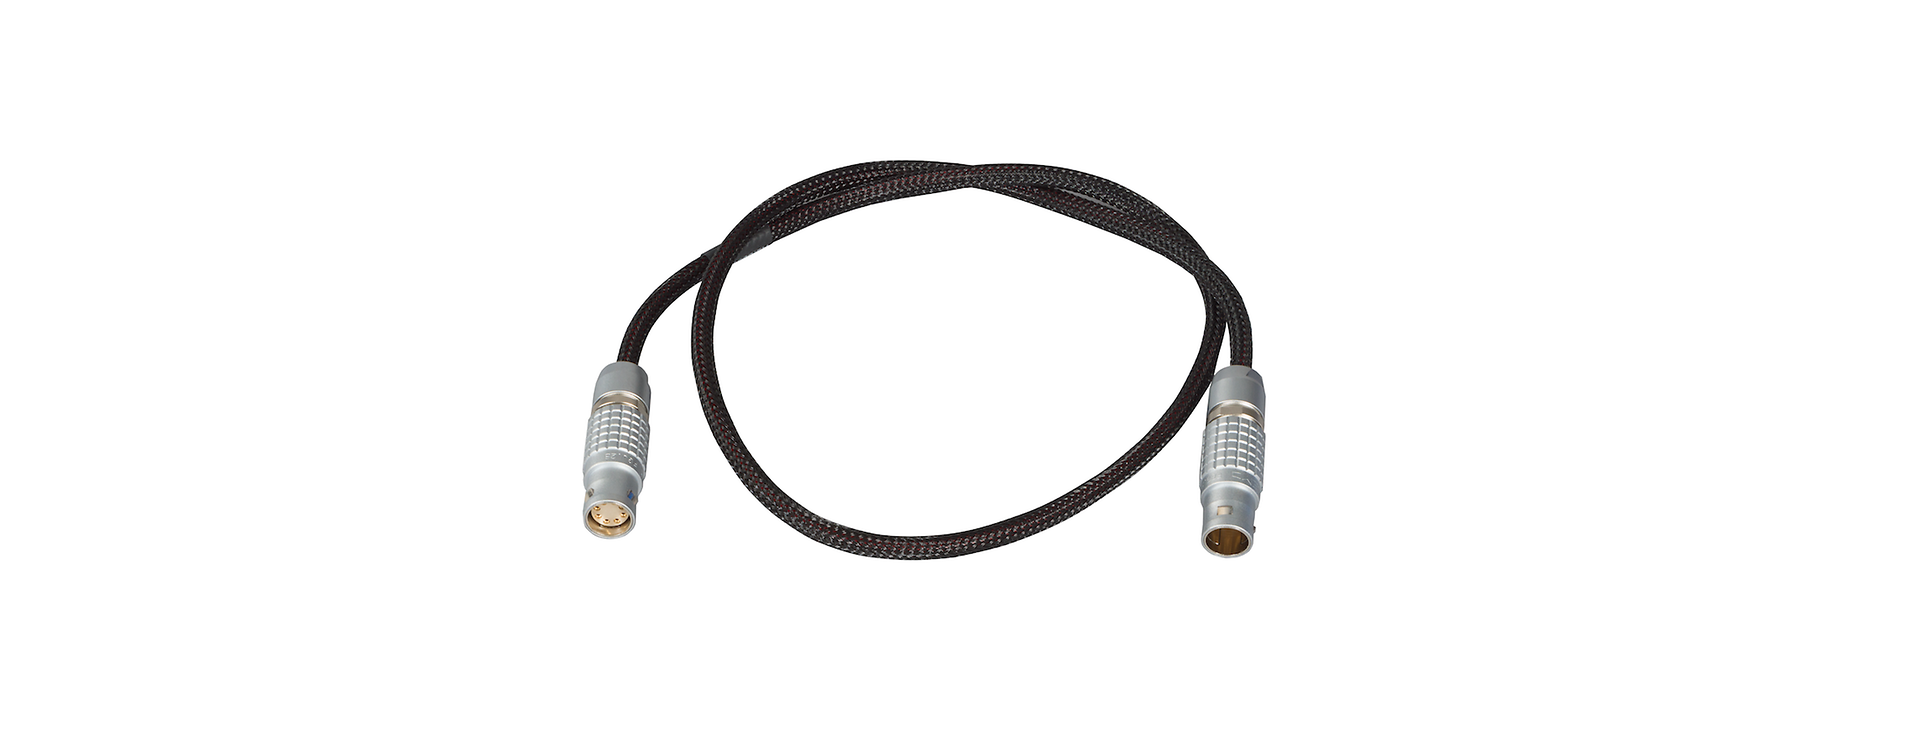 RC 3,5 – 8 - Recording cable, 3m, 3,5 jack to XLR